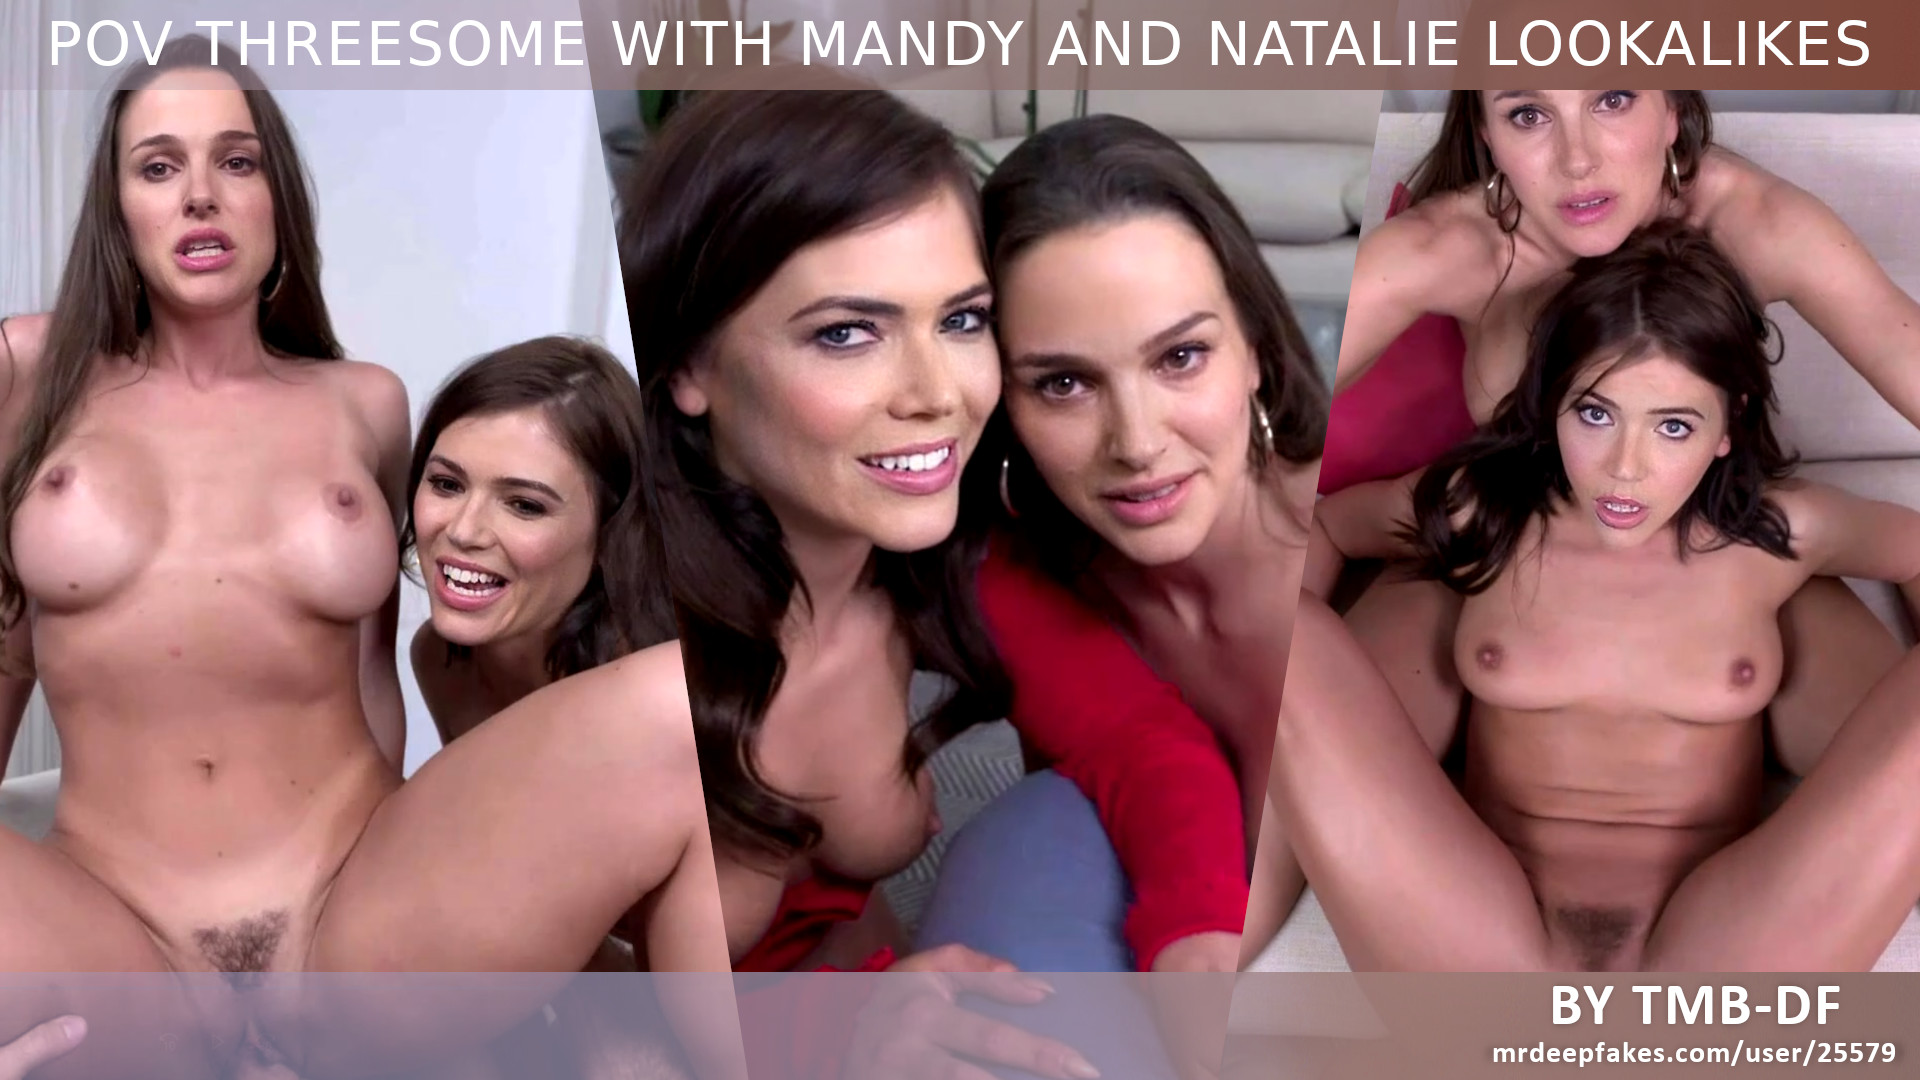 POV Threesome with Mandy Moore and Natalie Portman lookalikes - paid commission